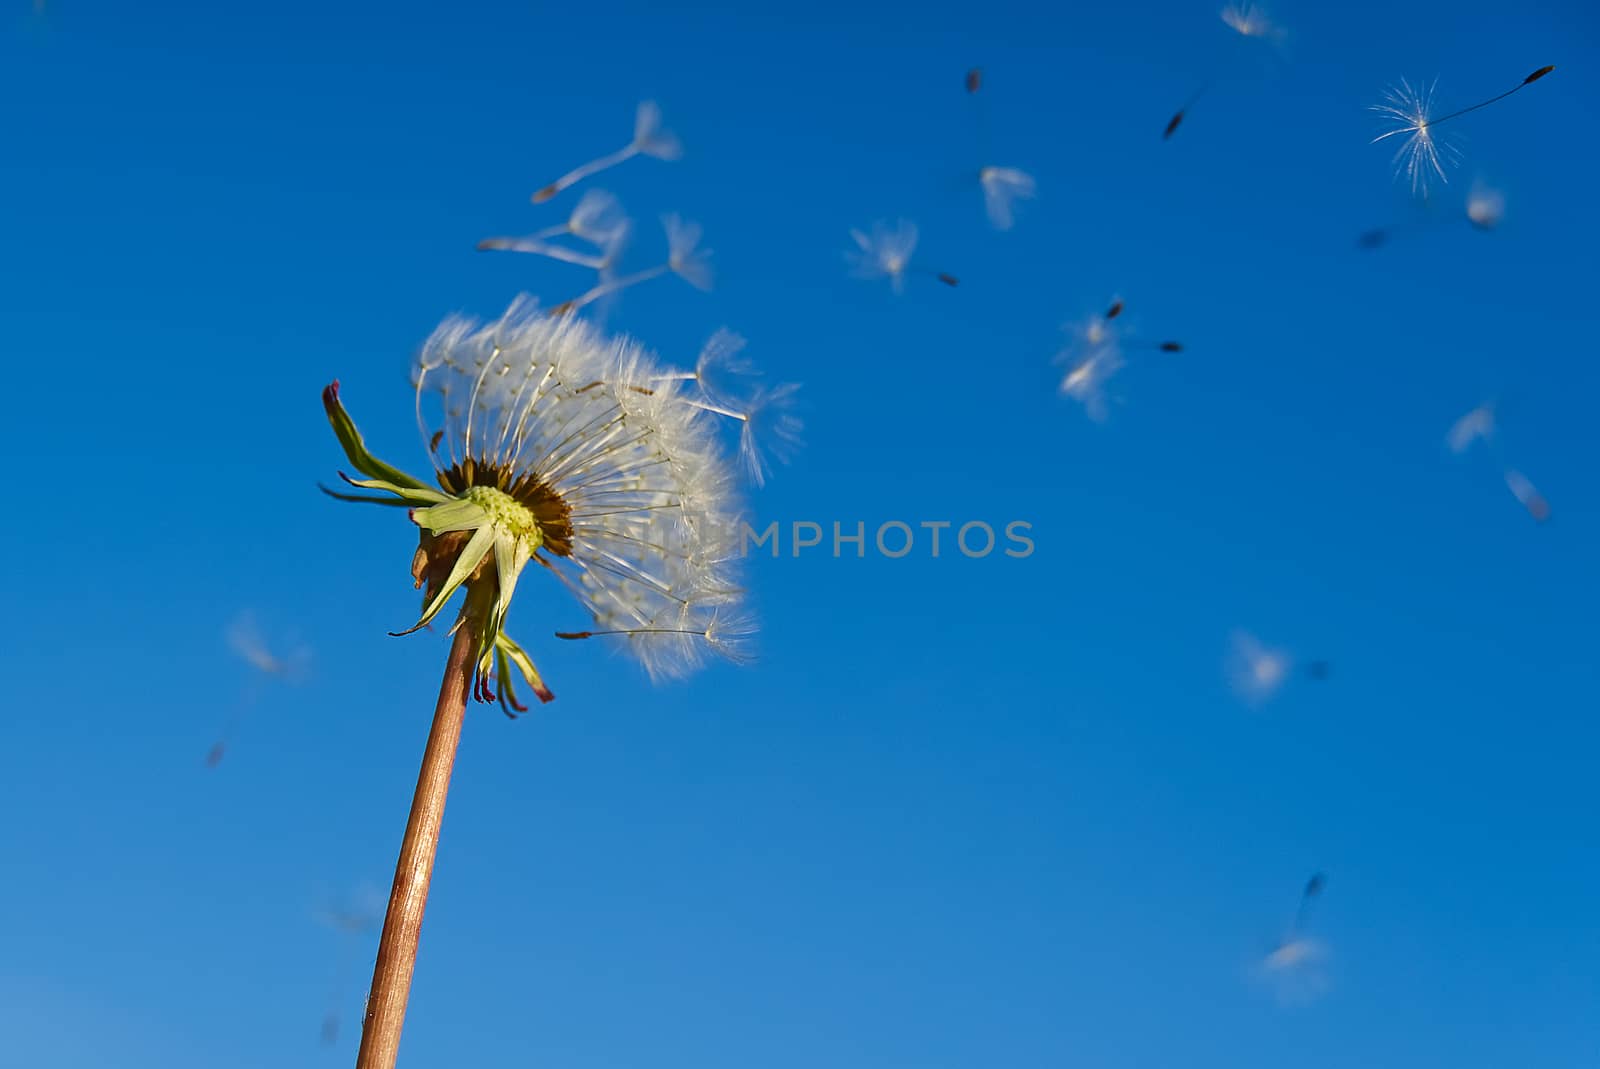 lonely white dandelion on a background of blue sky as a symbol of rebirth or the beginning of a new life. ecology concept